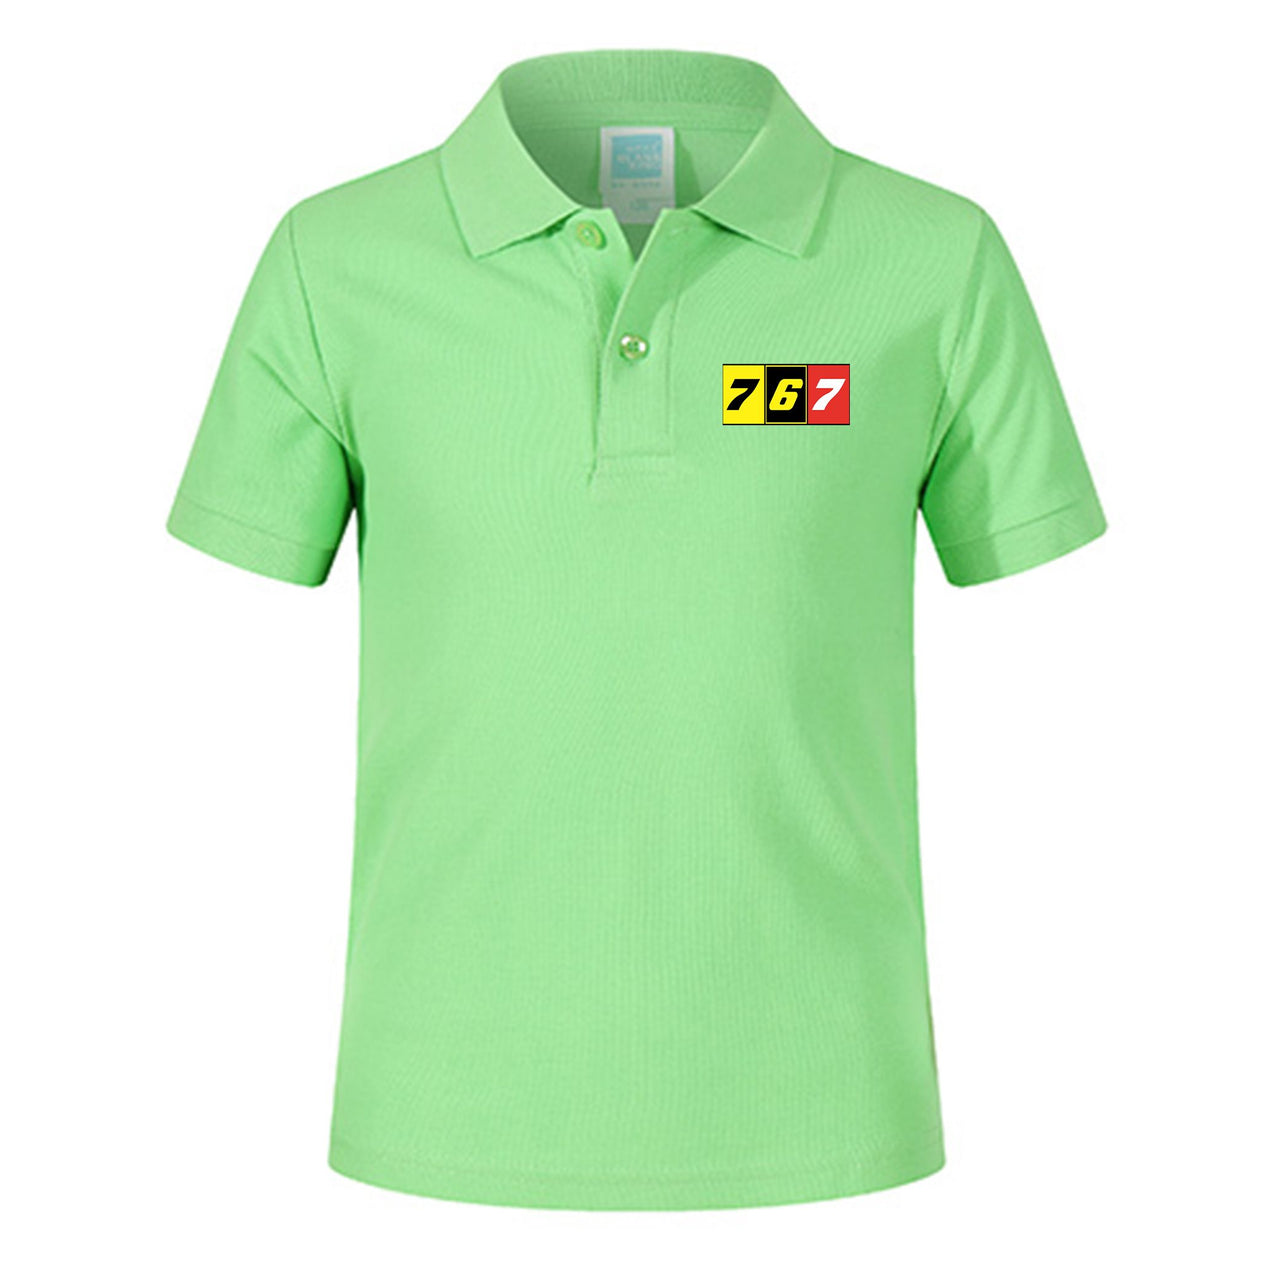 Flat Colourful 767 Designed Children Polo T-Shirts